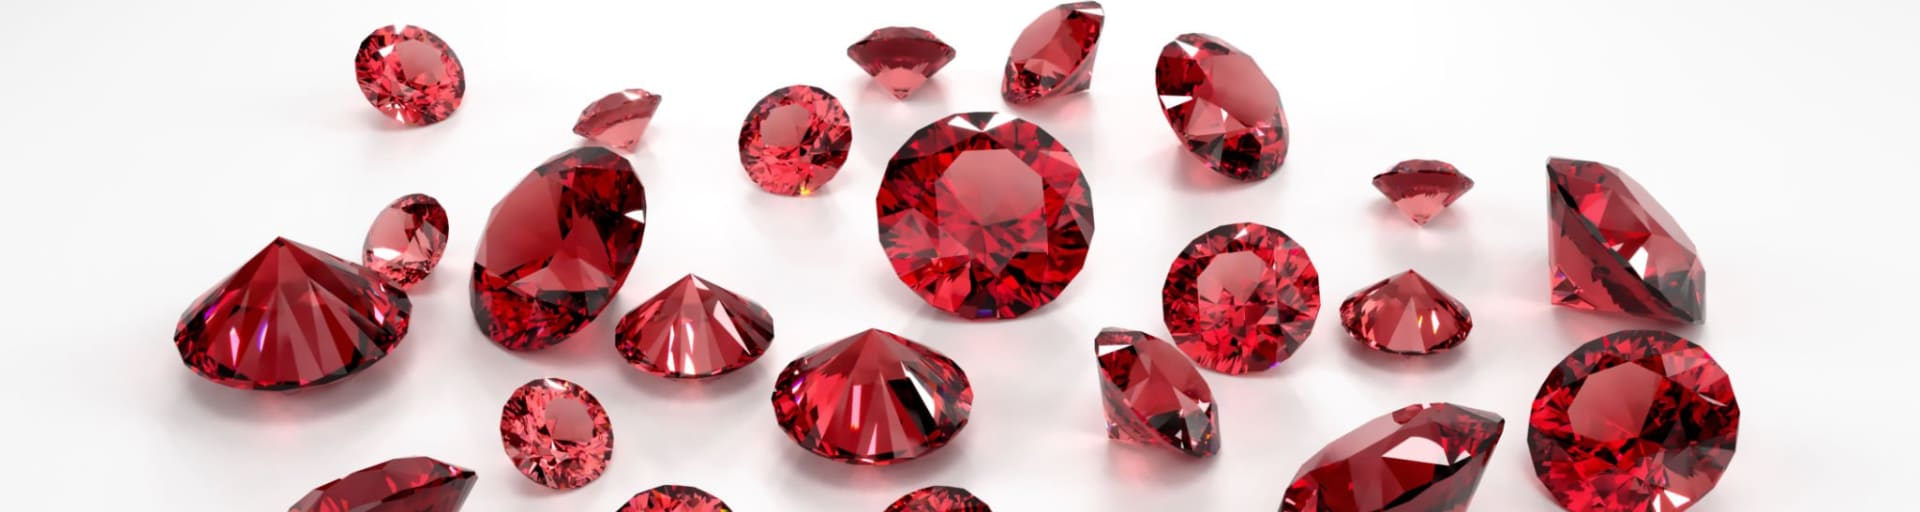 What Is January’s Birthstone?